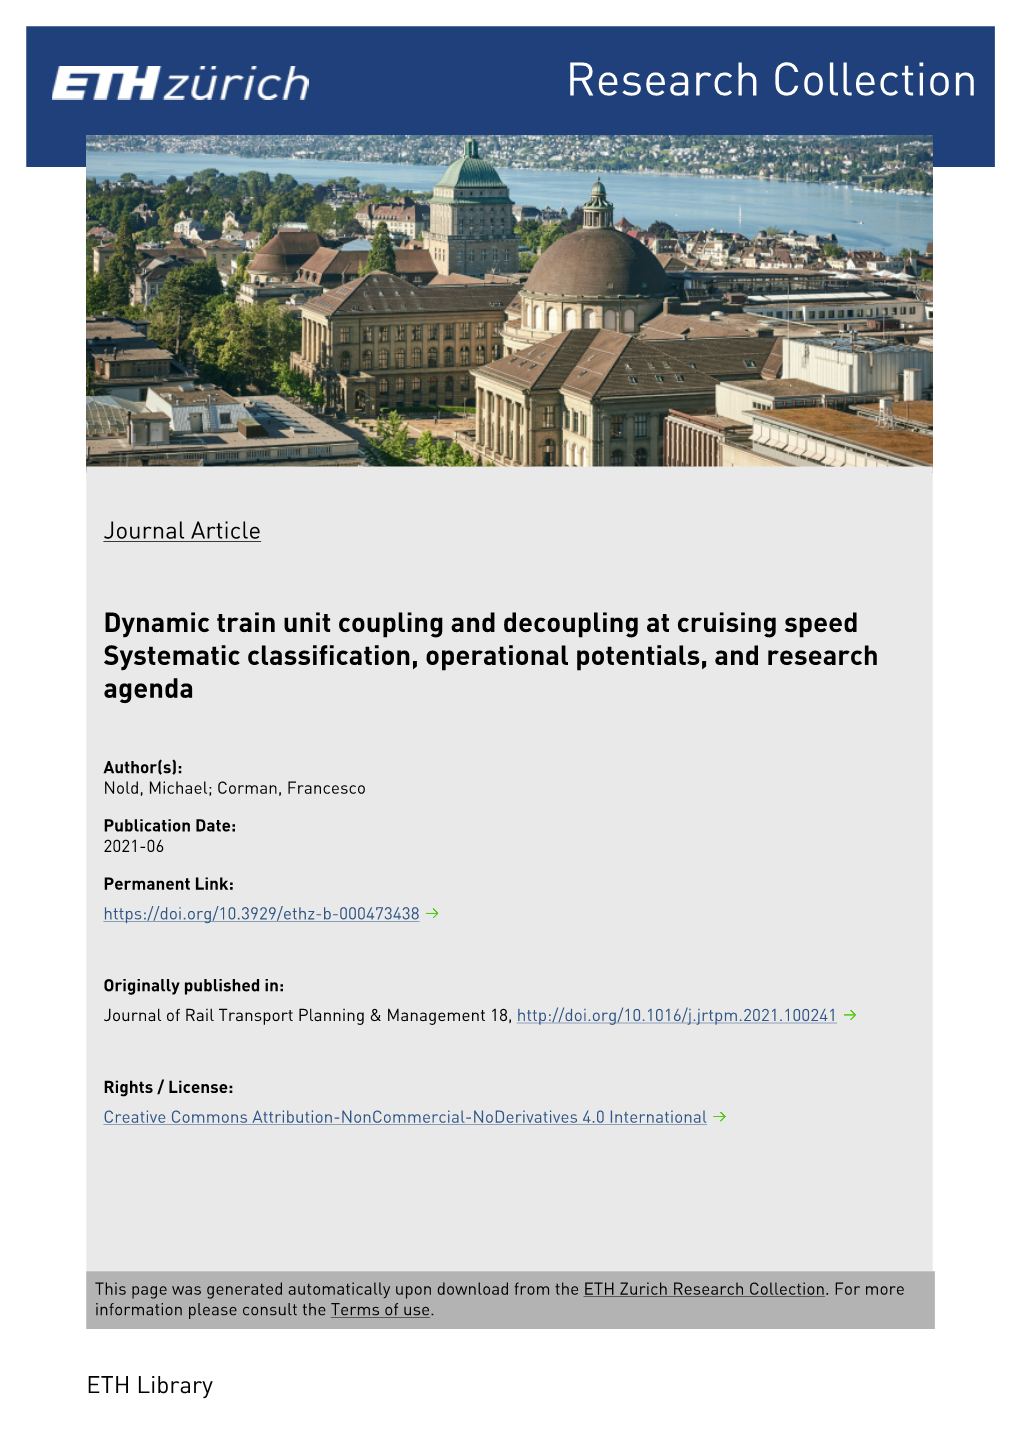 Dynamic Train Unit Coupling and Decoupling at Cruising Speed Systematic Classification, Operational Potentials, and Research Agenda